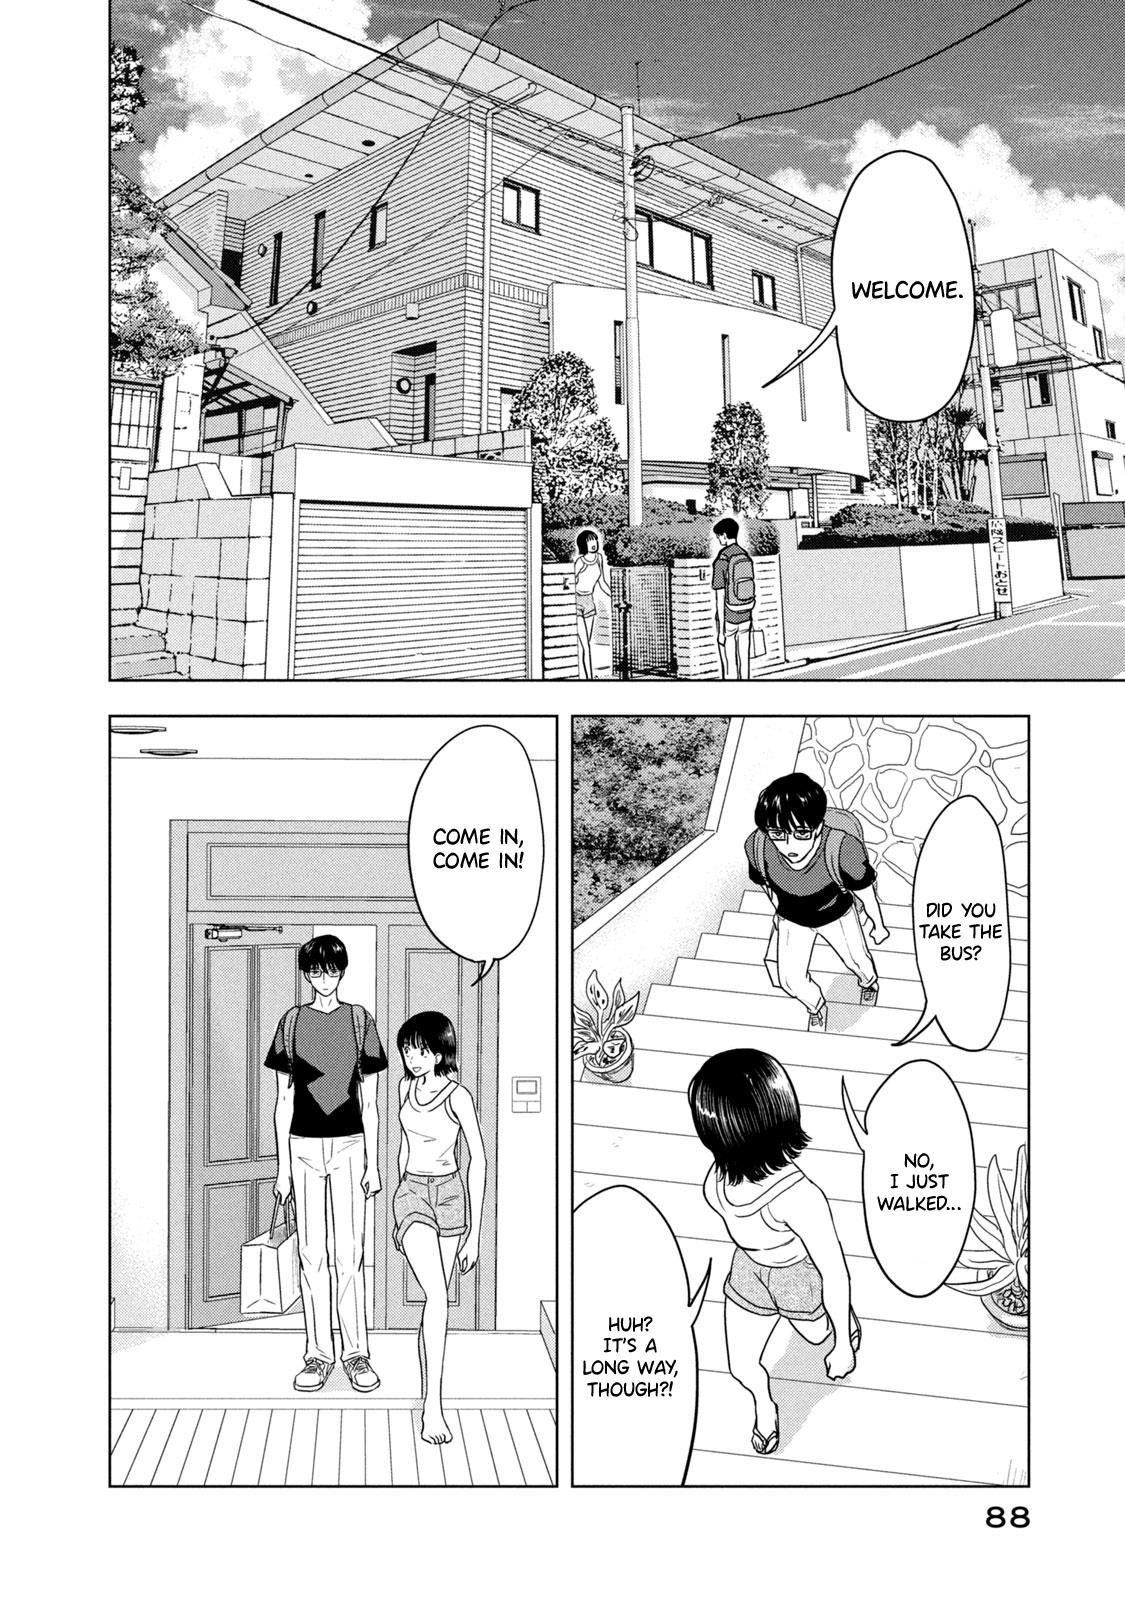 8-Gatsu 31-Nichi No Long Summer Vol.1 Chapter 5: August 31 Invited Over - Picture 2